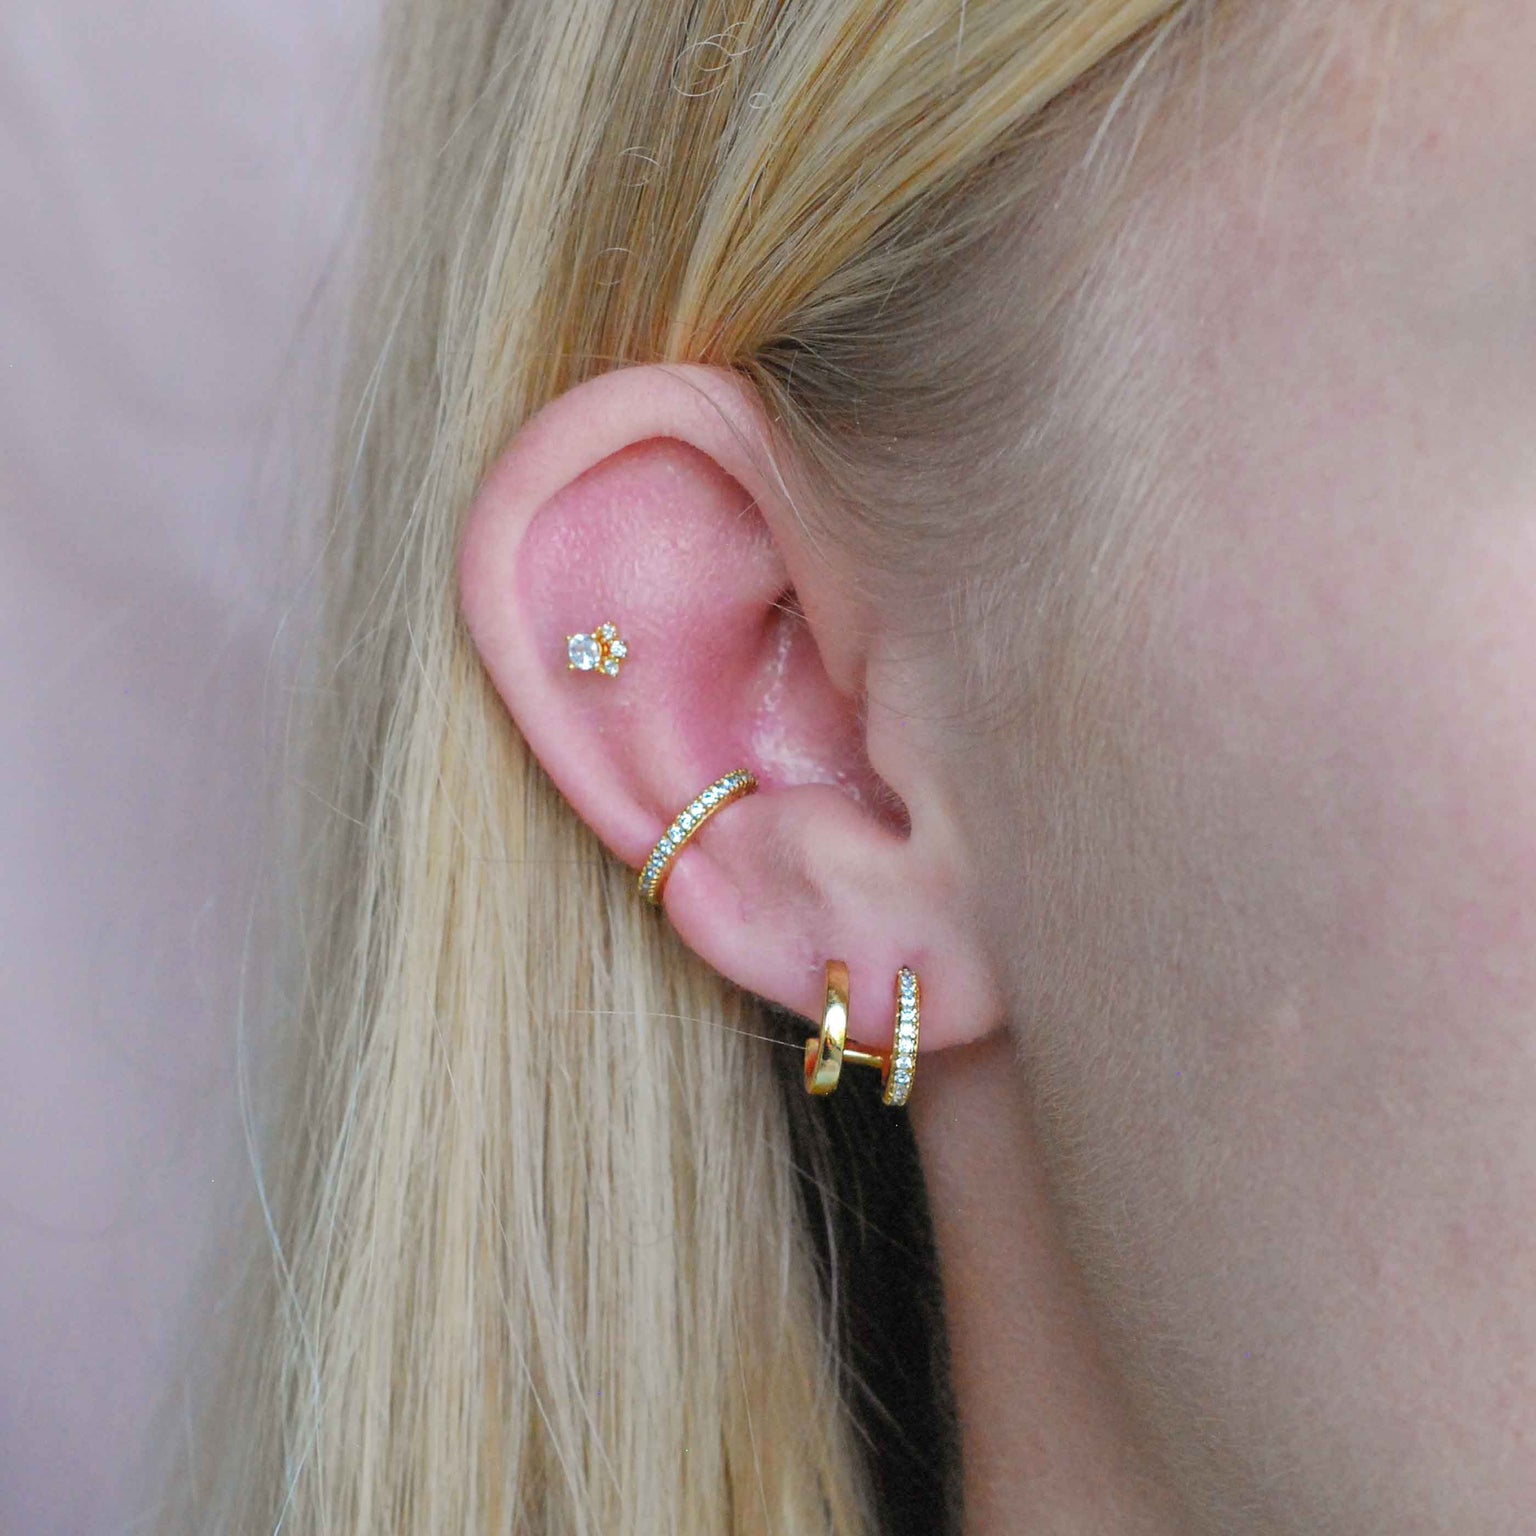 Crystal Ear Cuff in Gold worn with sparkling earrings